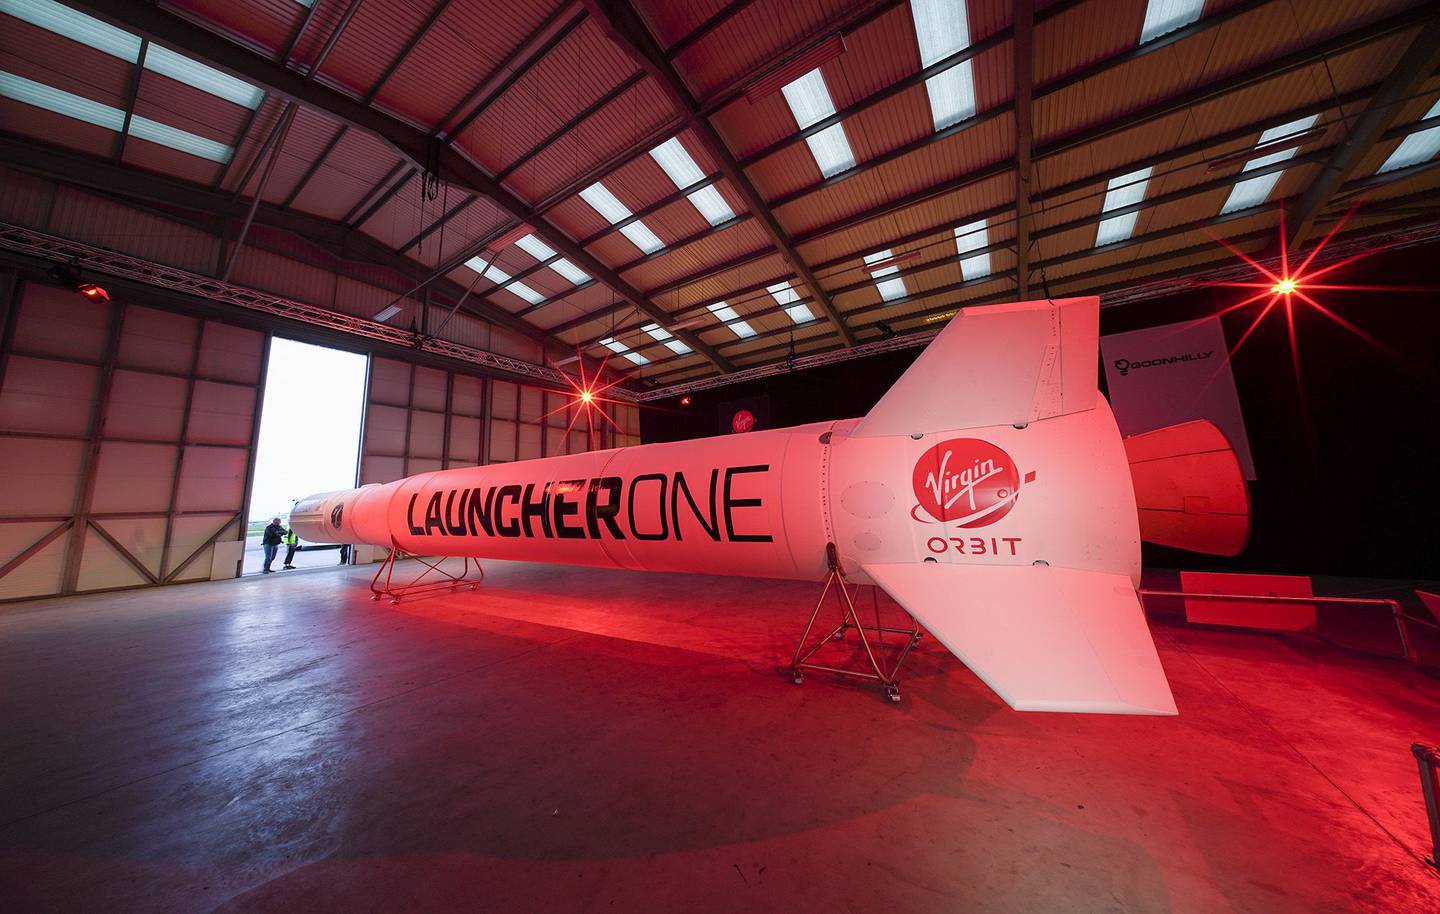 The Virgin Orbit Launcher One rocket in its hanger at Newquay Airport on August 10, 2021 in Newquay, England.